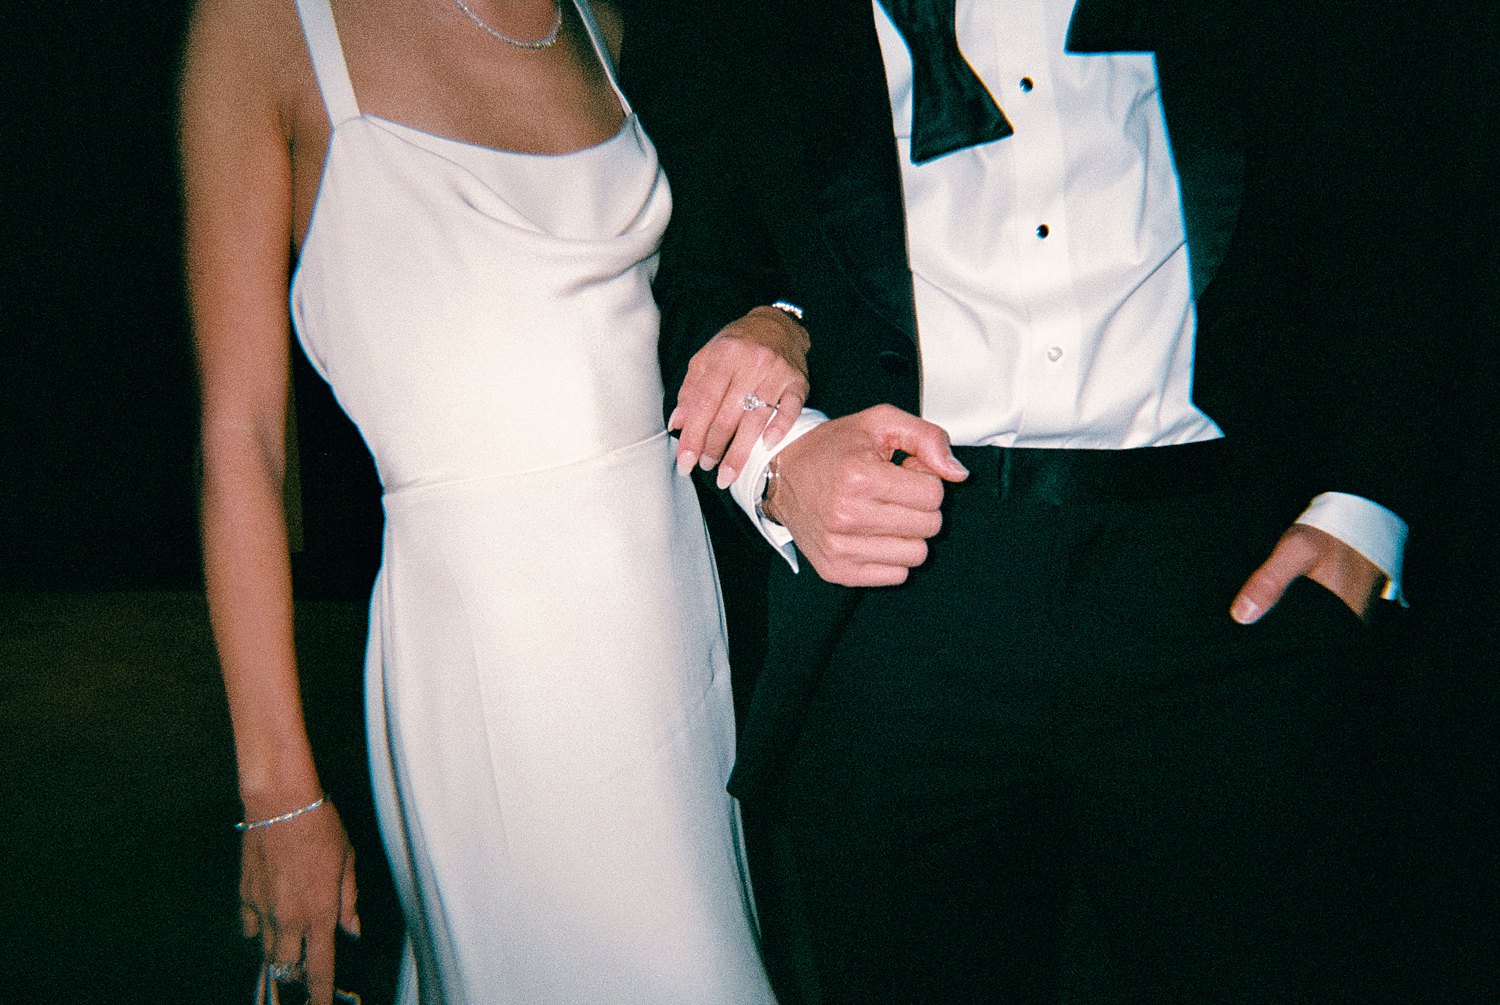 Man in black tuxedo clasping arms with woman in white dress